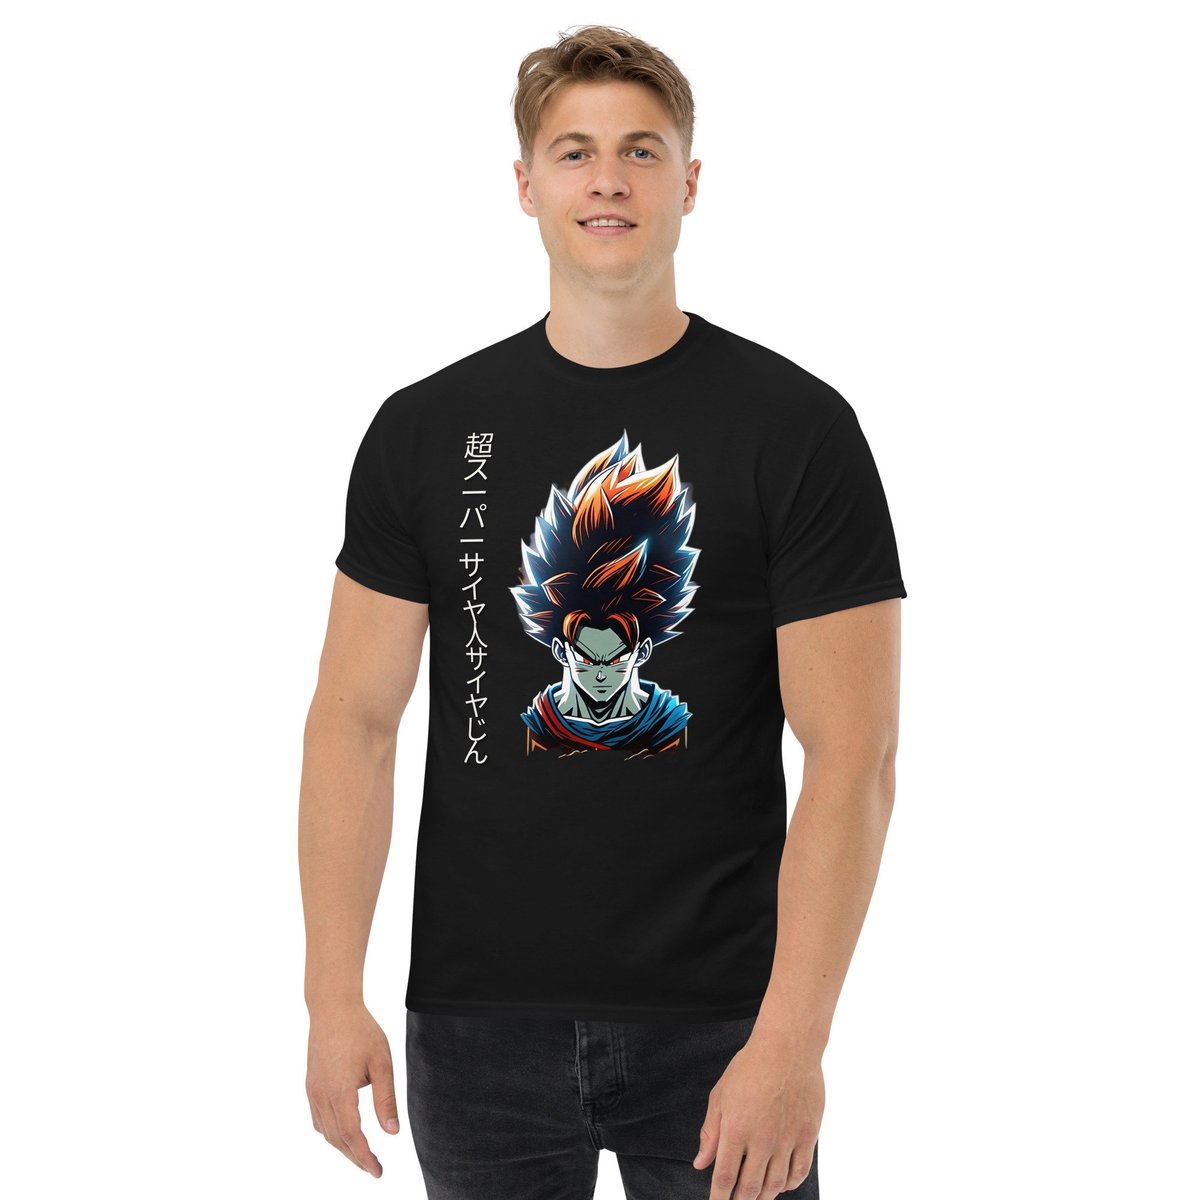 Excited to share the latest addition to my #etsy shop: Super Saiyan Goku T-Shirt I Dragon Ball Z T shirt I Anime T shirt etsy.me/3BBL3MJ #stagparty #streetwear #shortsleeve #crew #dragonball #dragonballshirt #dragonshirt #supersaiyan #saiyan